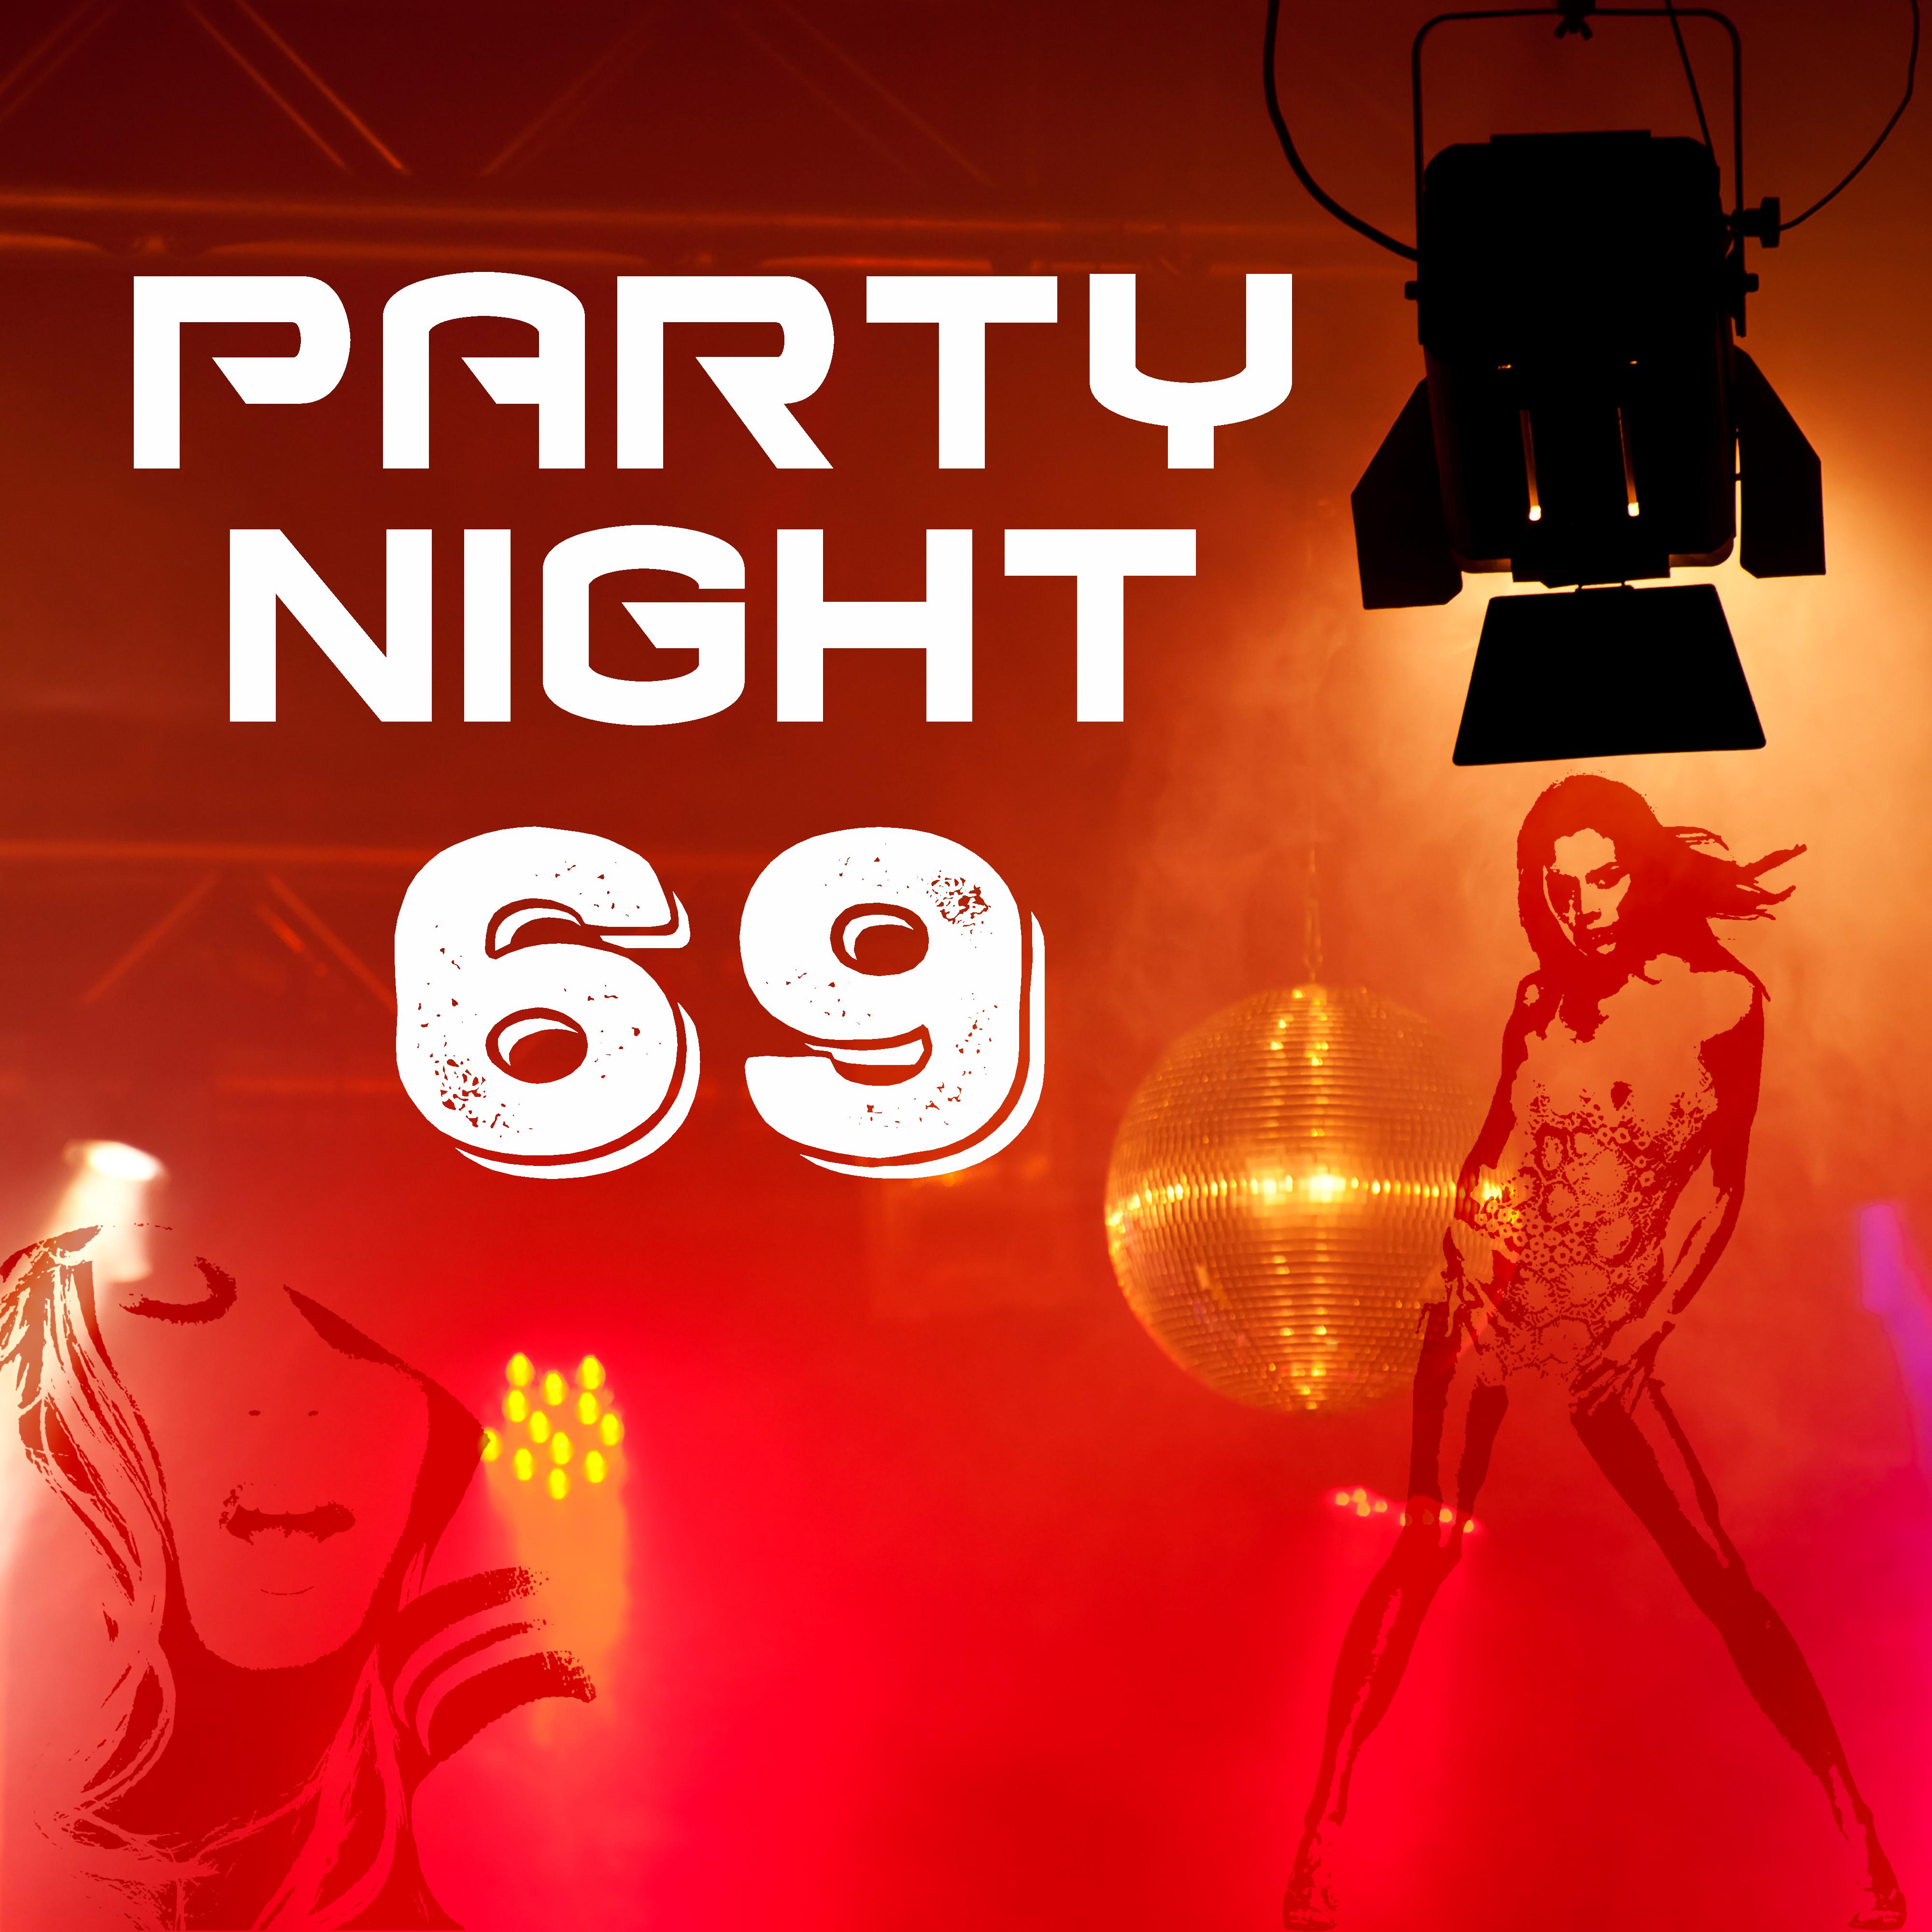 Party Night 69 – **** Chill, Summer Vibes, Best Holiday, Ibiza Poolside, After Dark, Dance Music